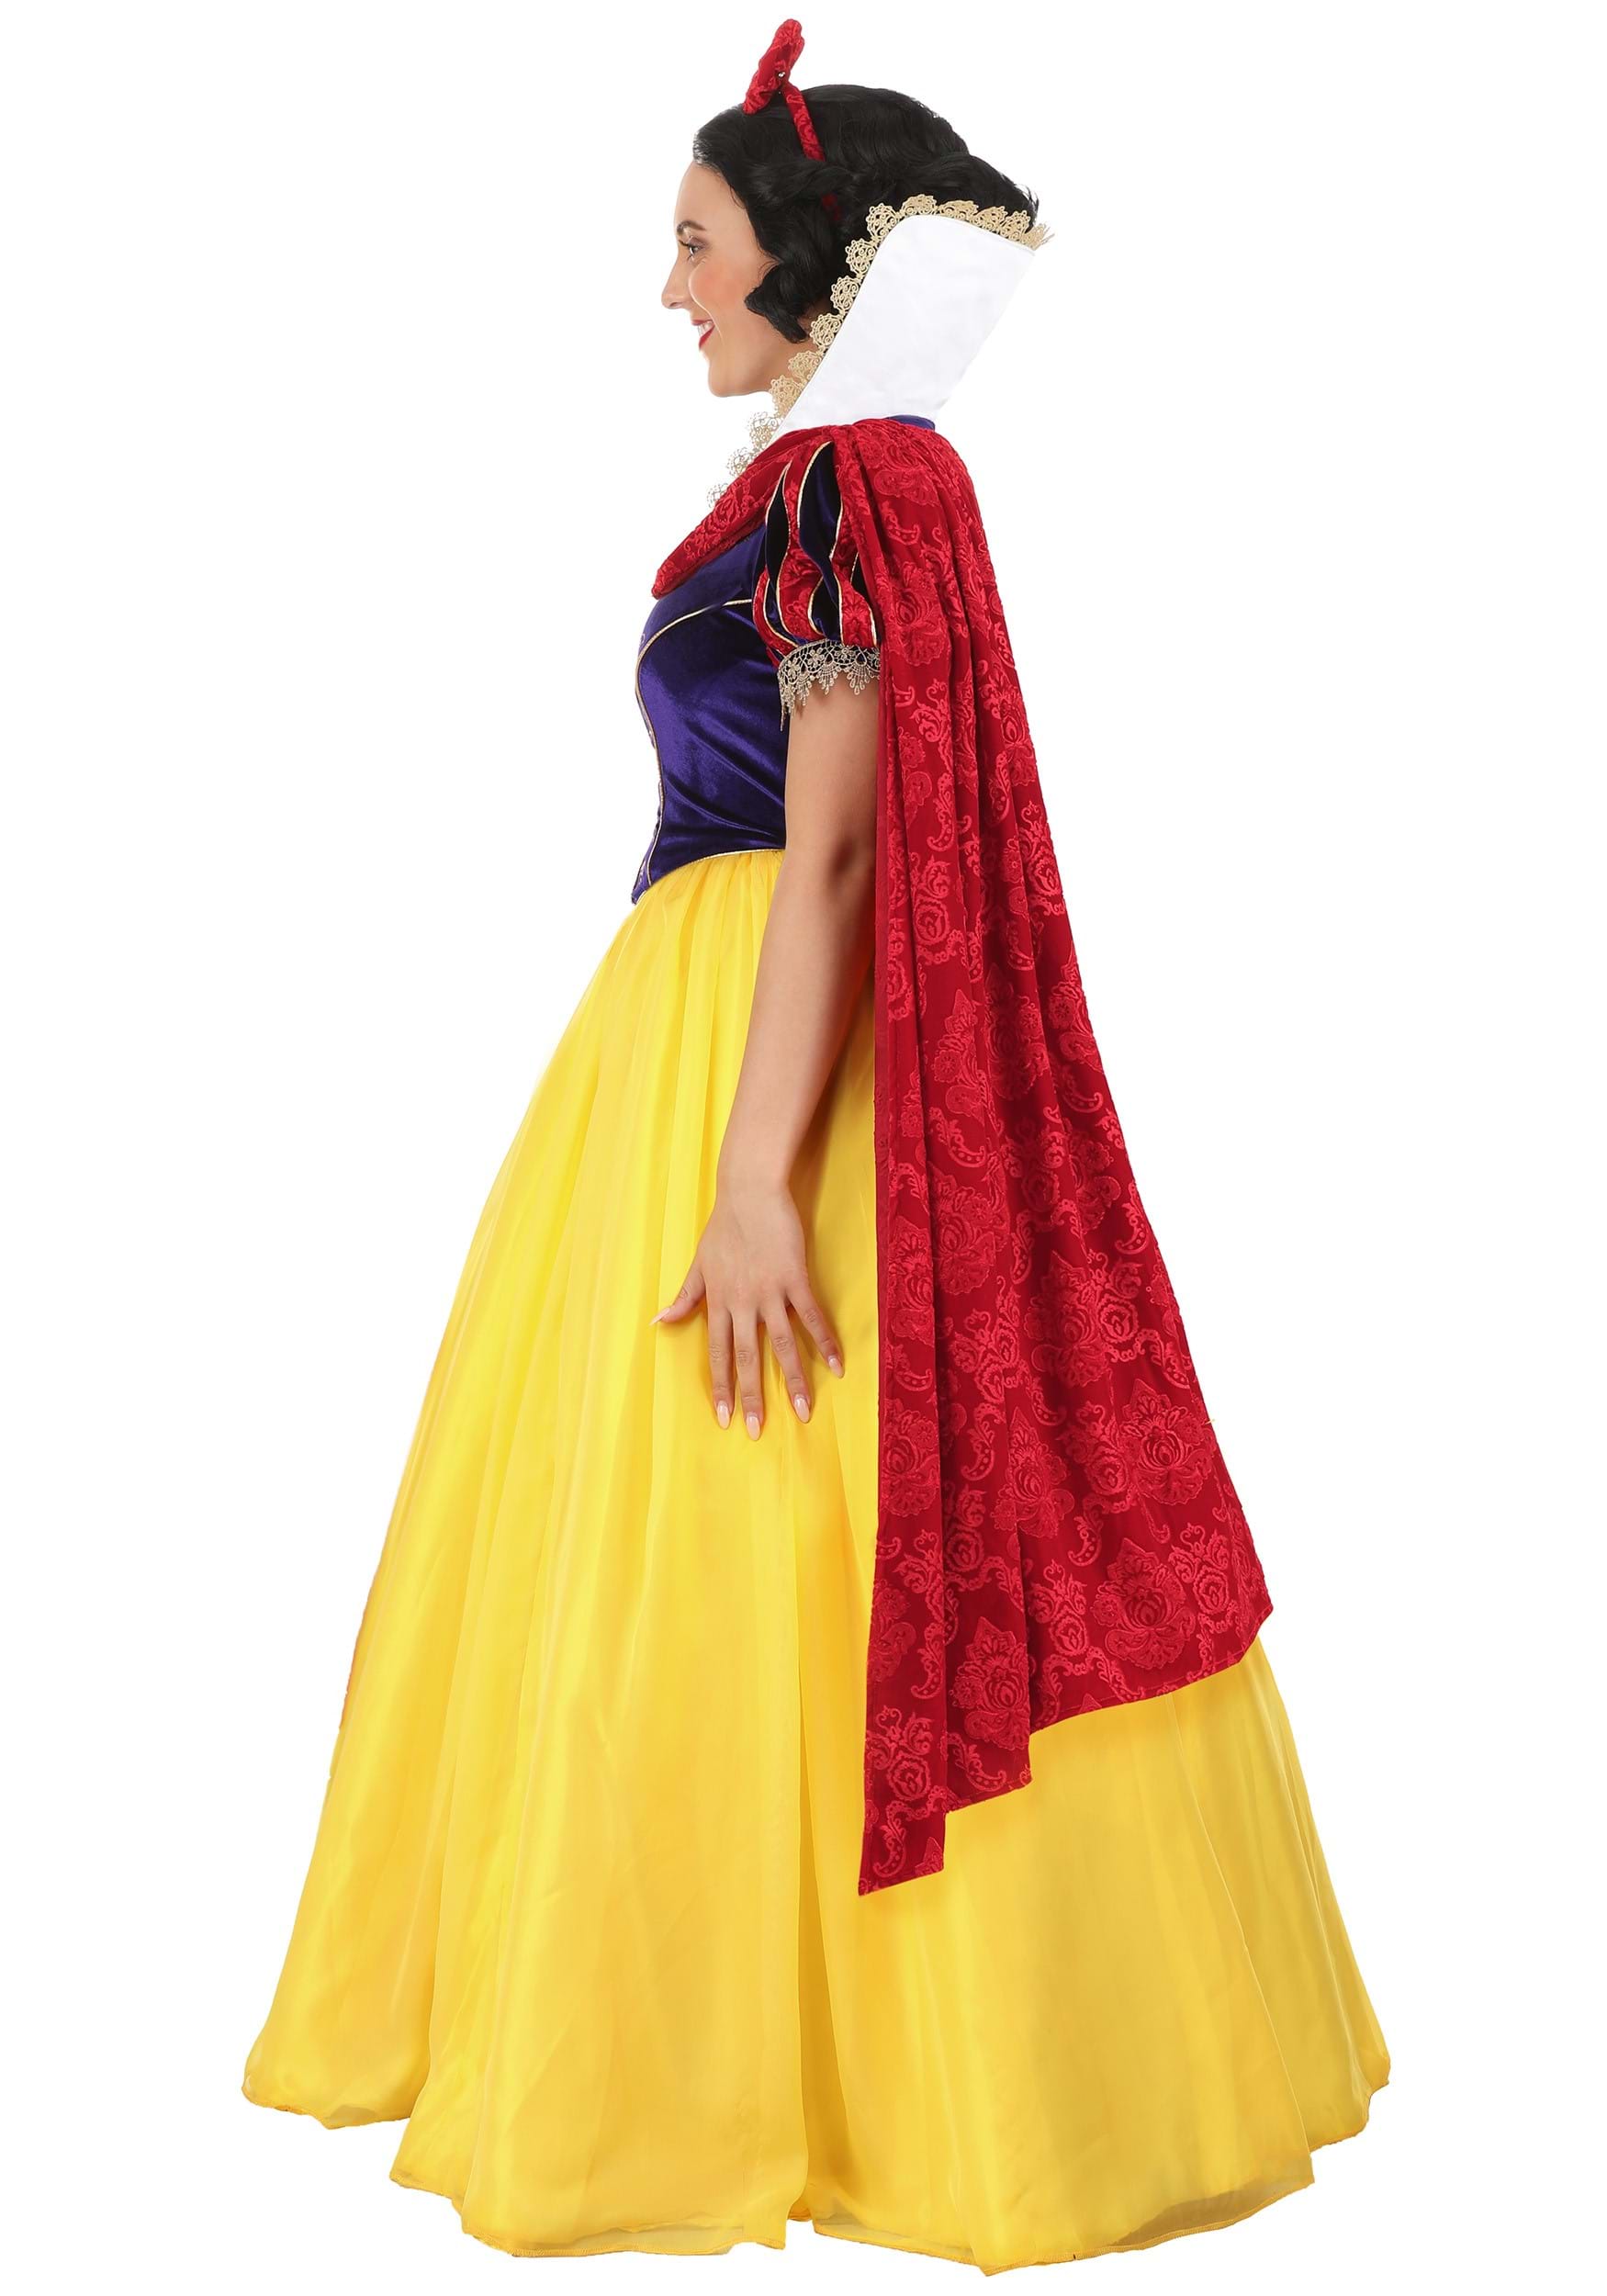 WISHTEN Snow White Costume for Women,Adults Princess Snow White Dress with  Headband, Halloween Costume Cosplay Dress Up Outfit (Medium) :  : Toys & Games